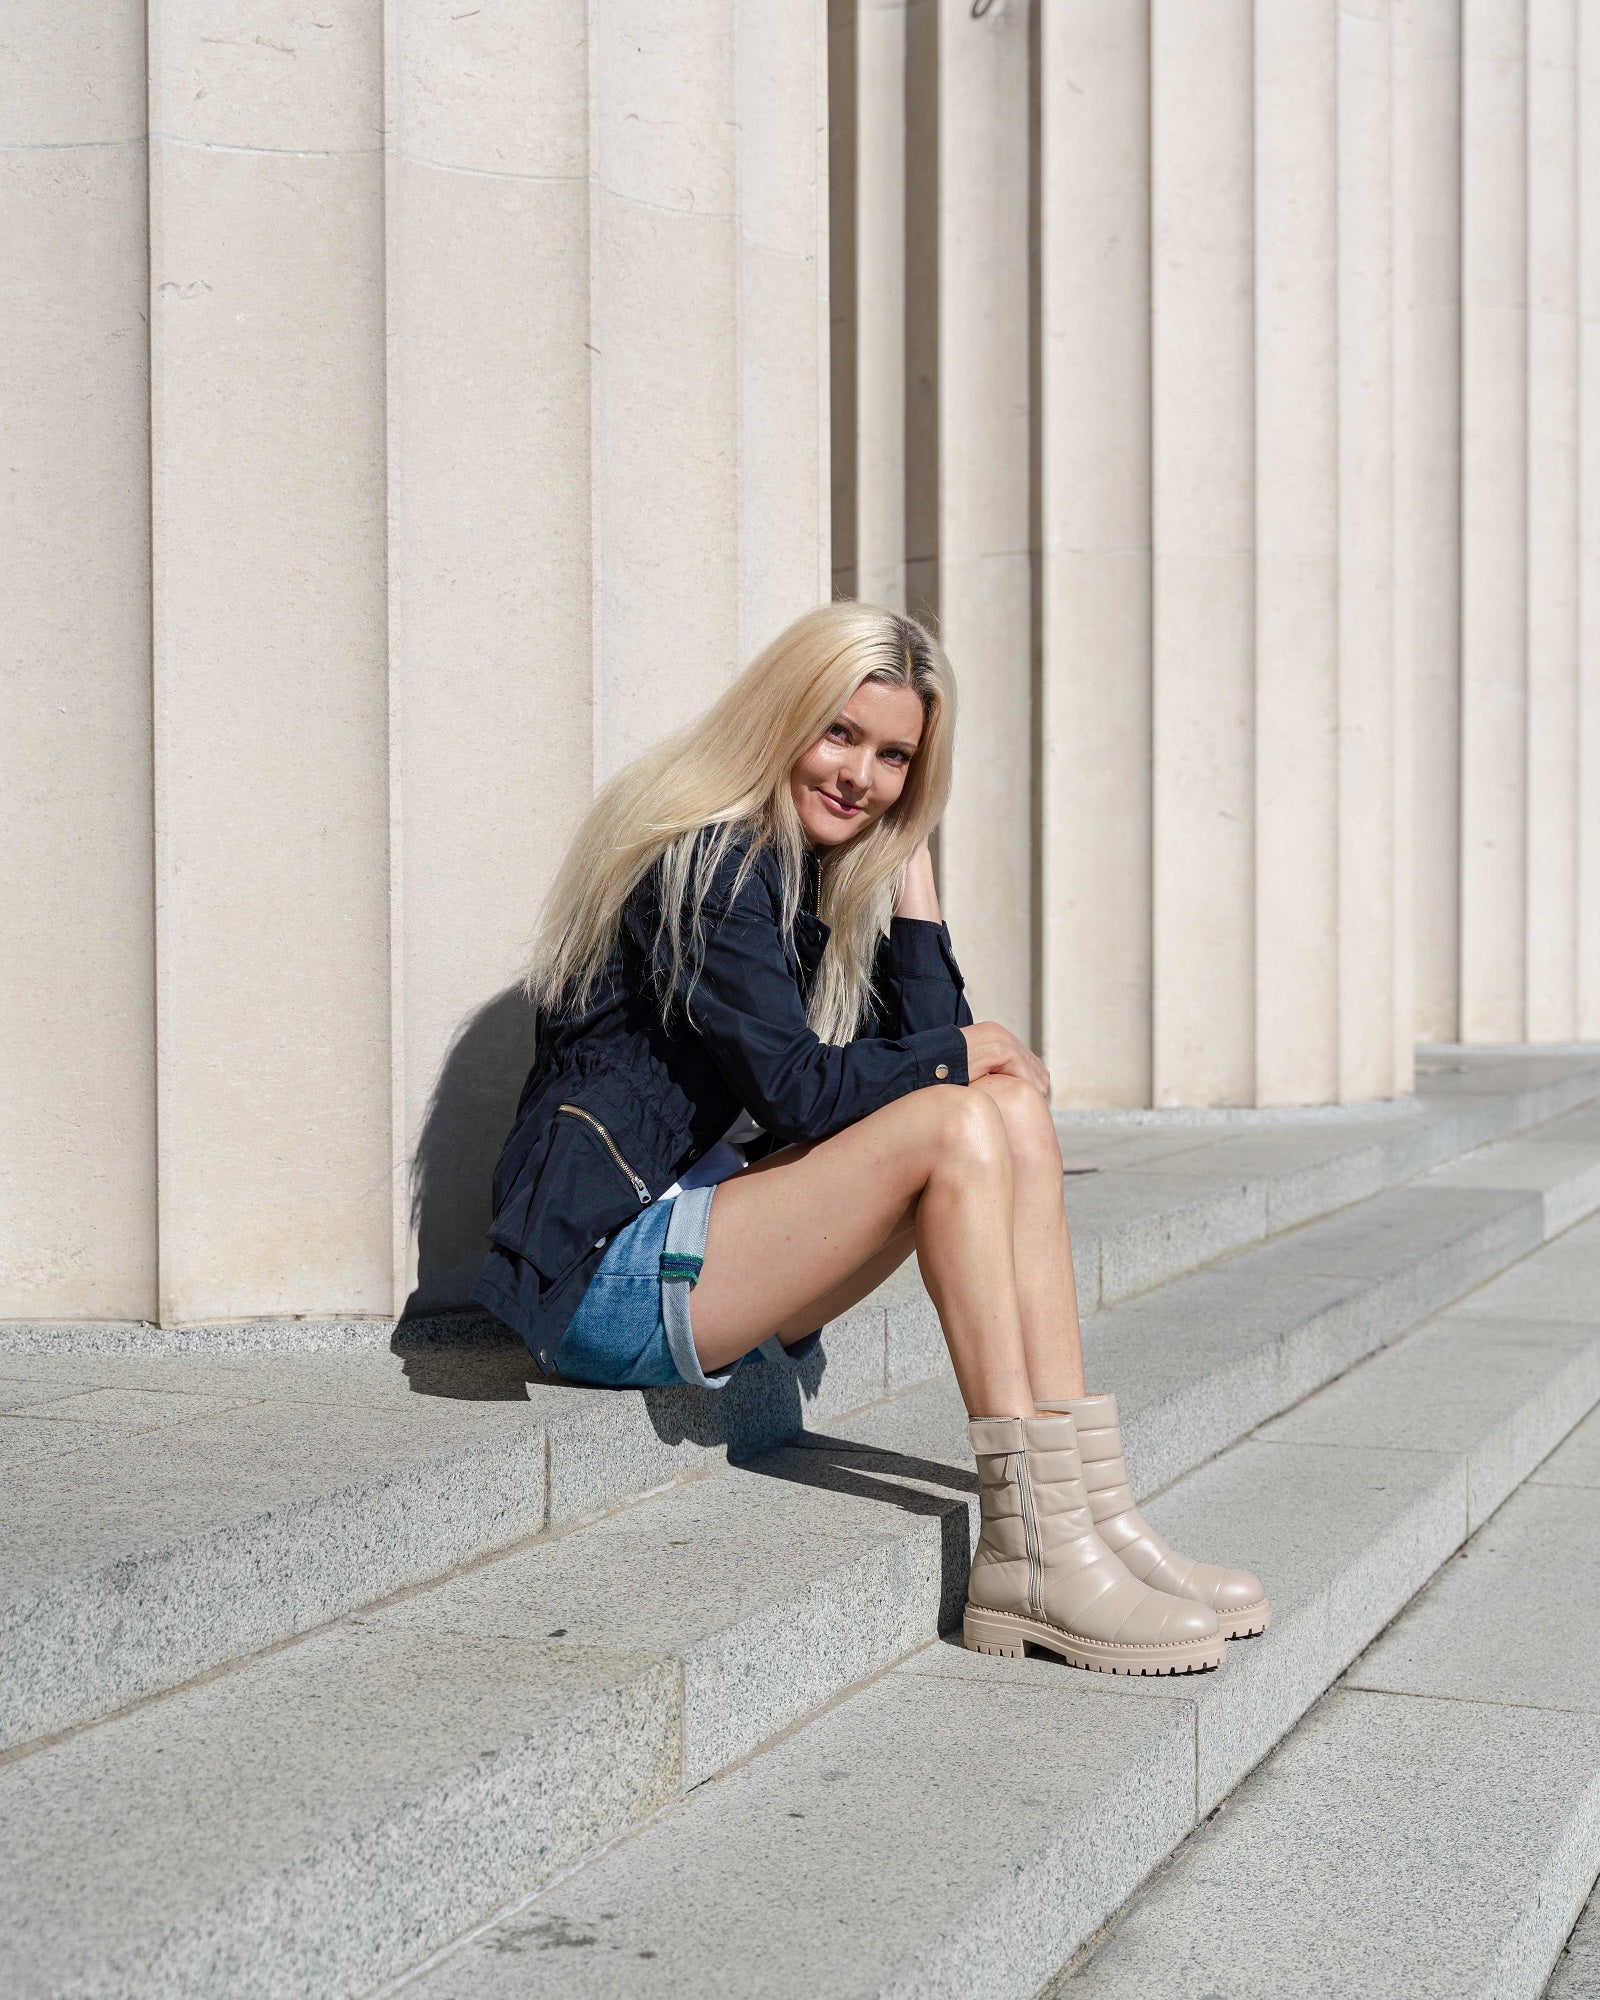 Olivia Combat Boot Cream SAMPLE by Sole Shoes NZ AB15-38 SAMPLE